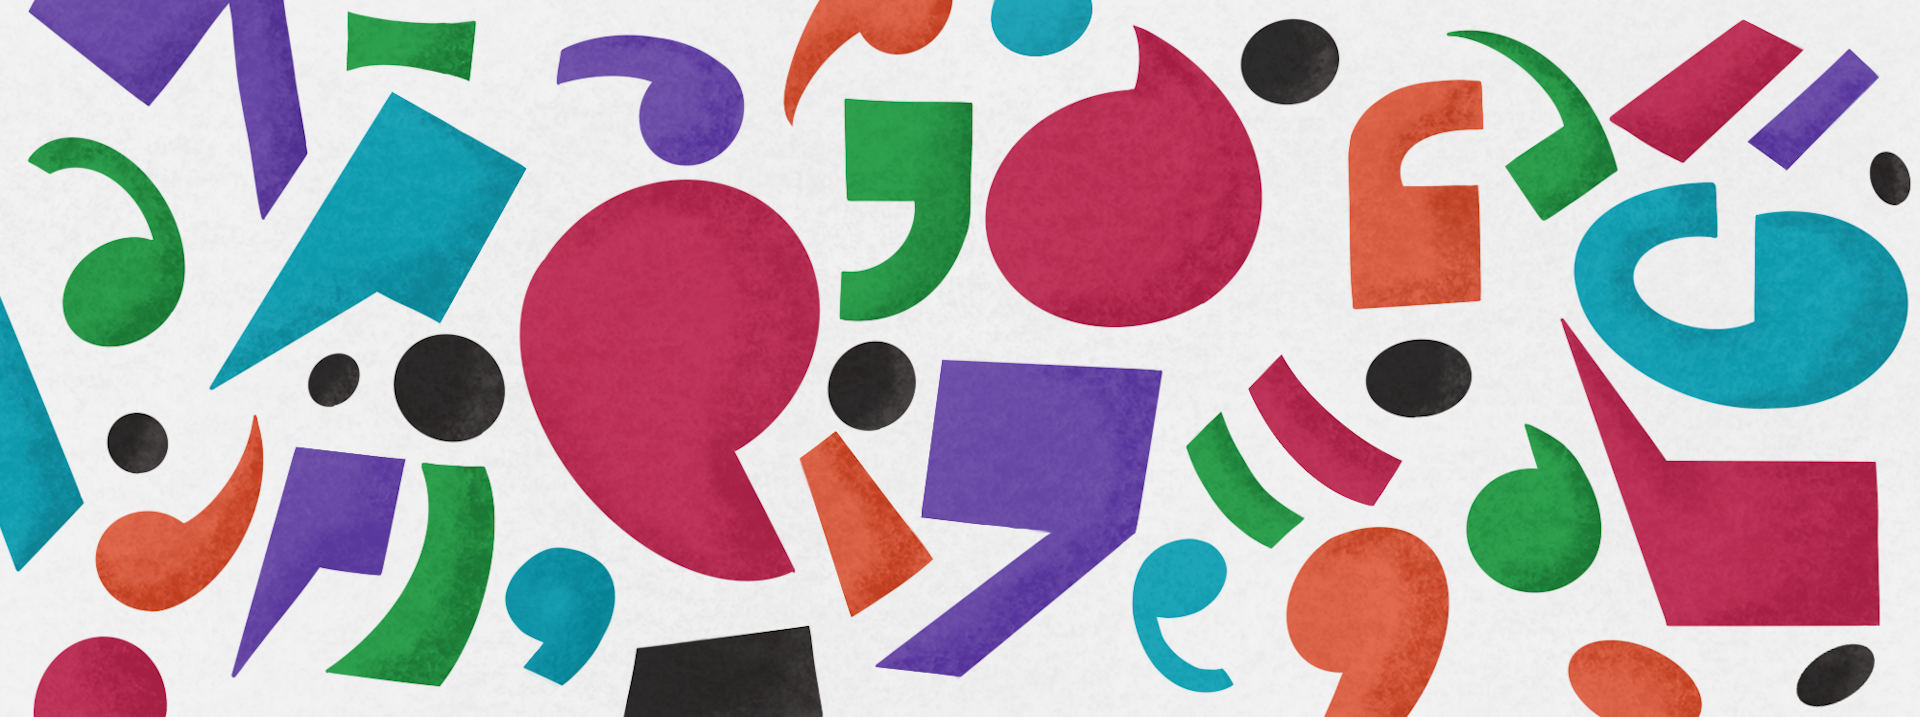 Abstract illustration of speech marks and other shapes in red, purple, green, orange and blue